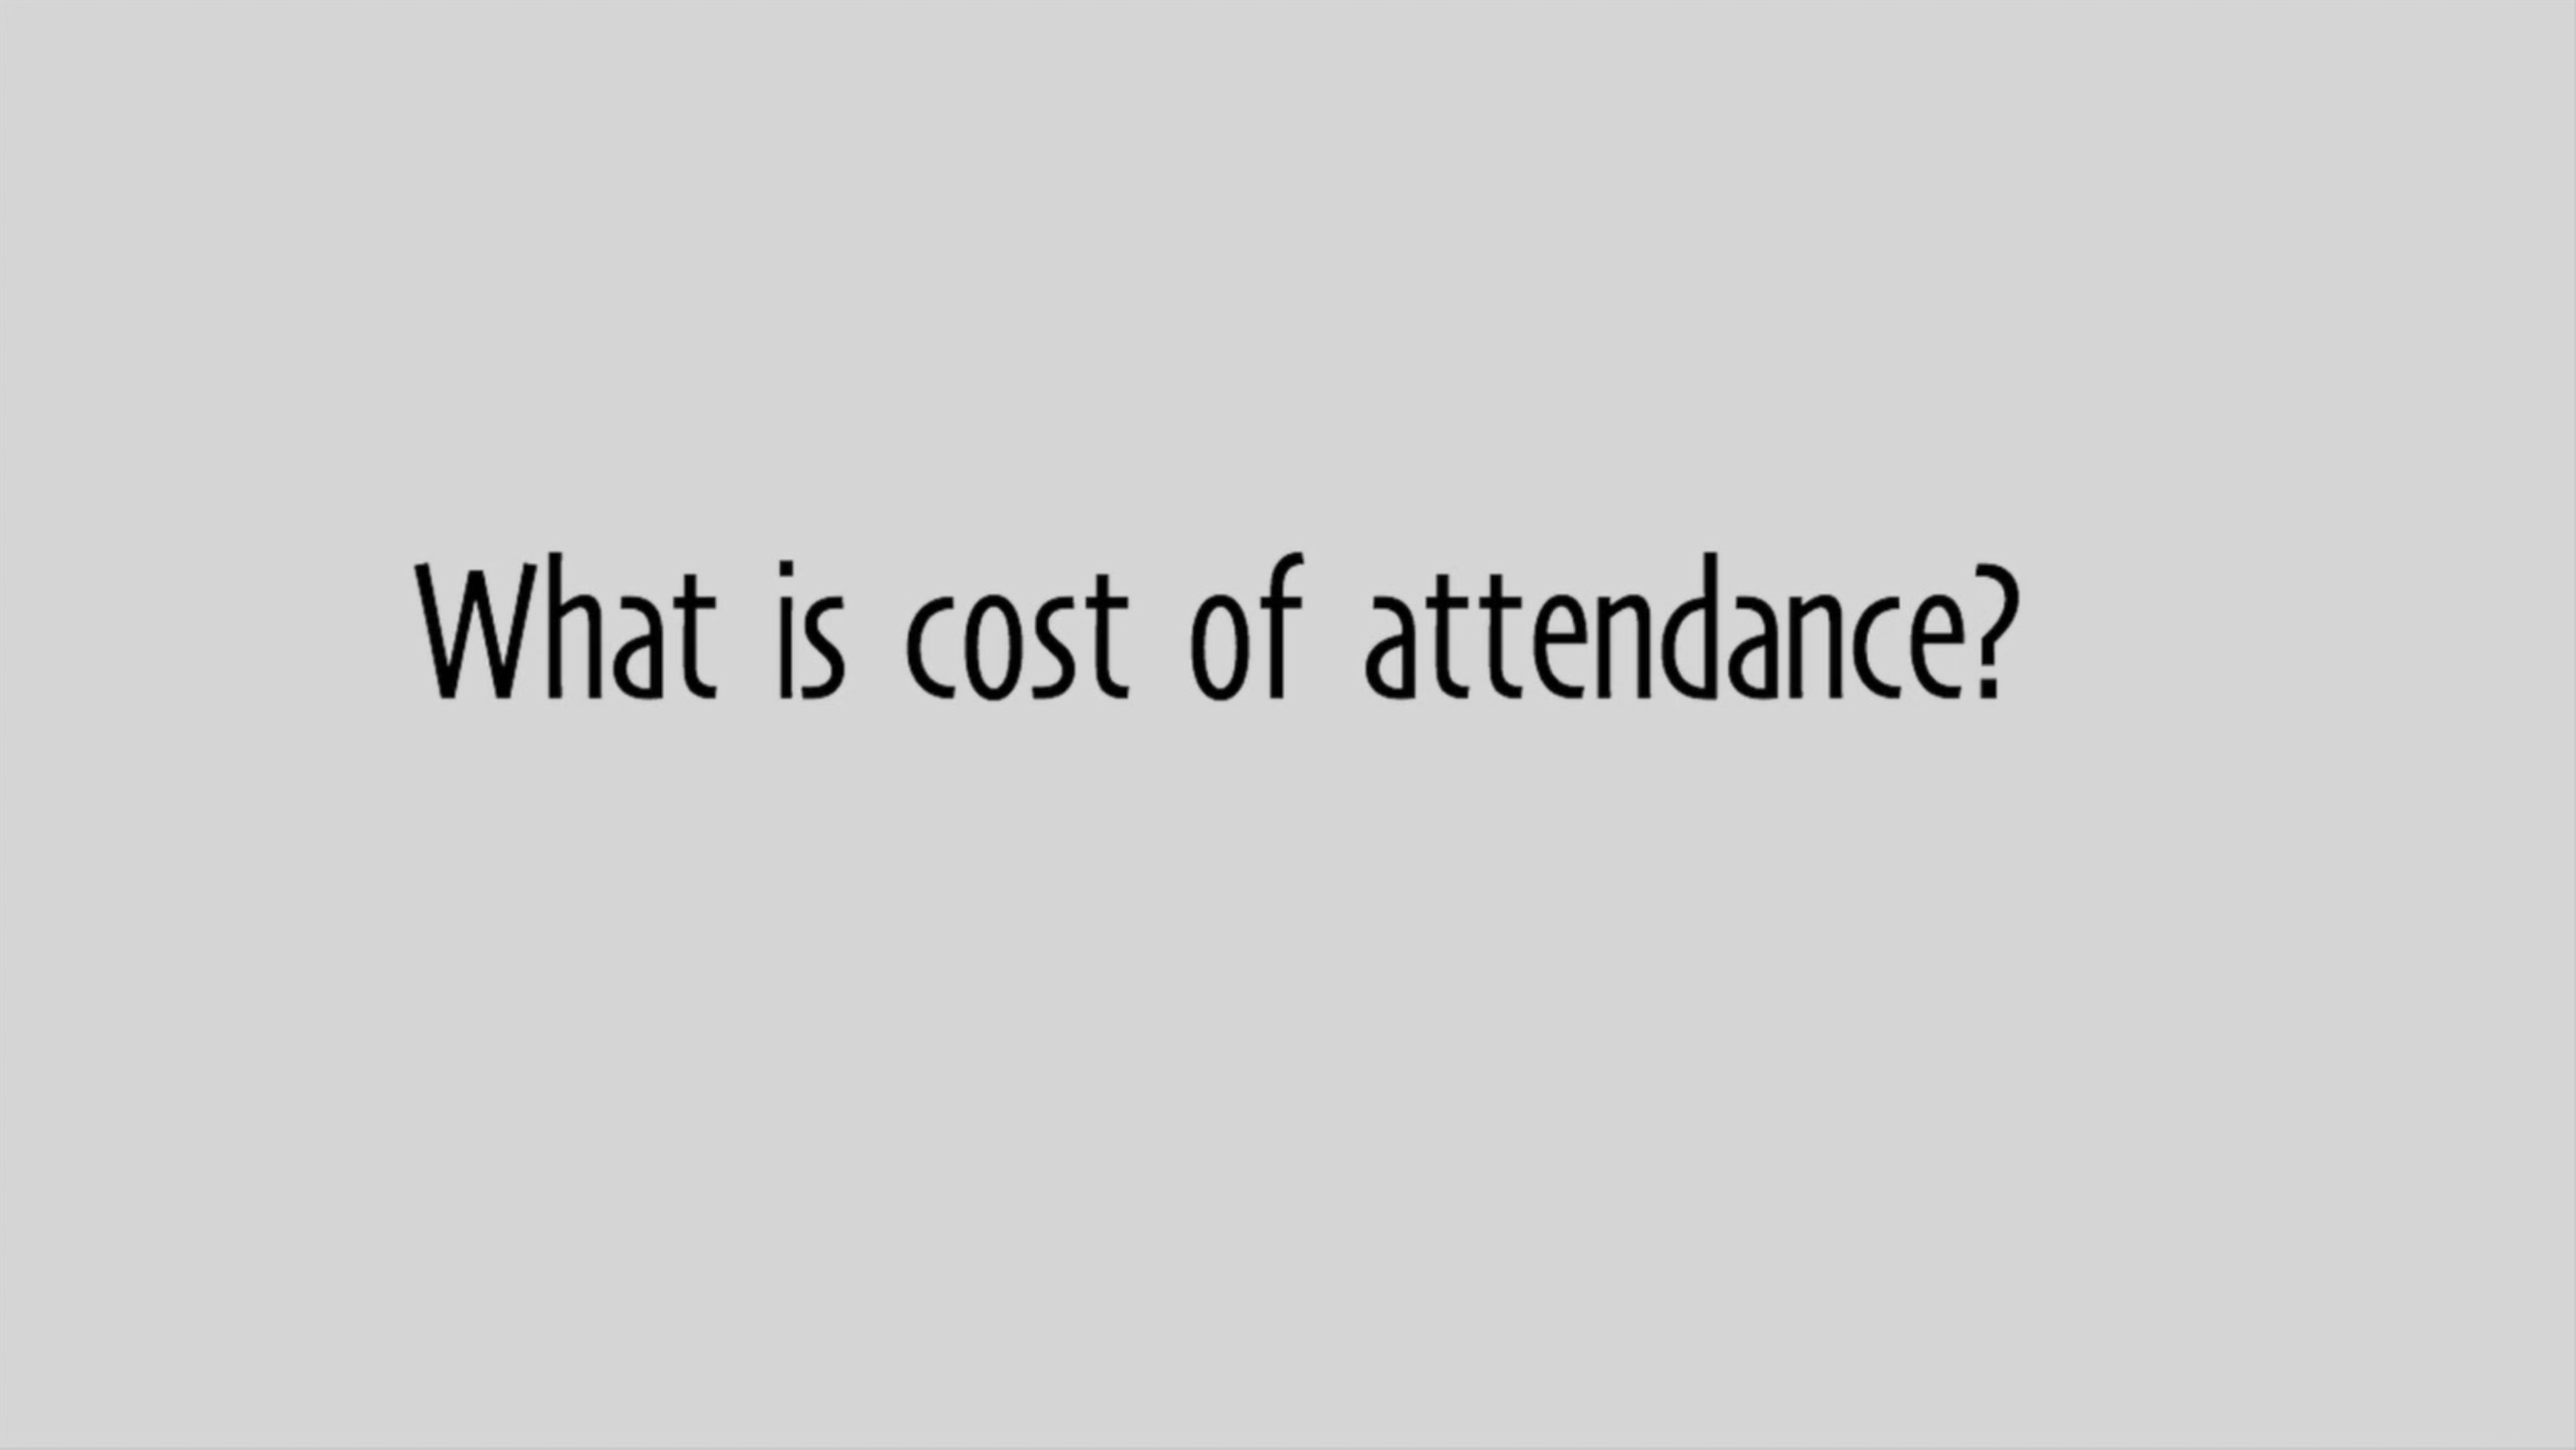 Play 'What is cost of attendance?'